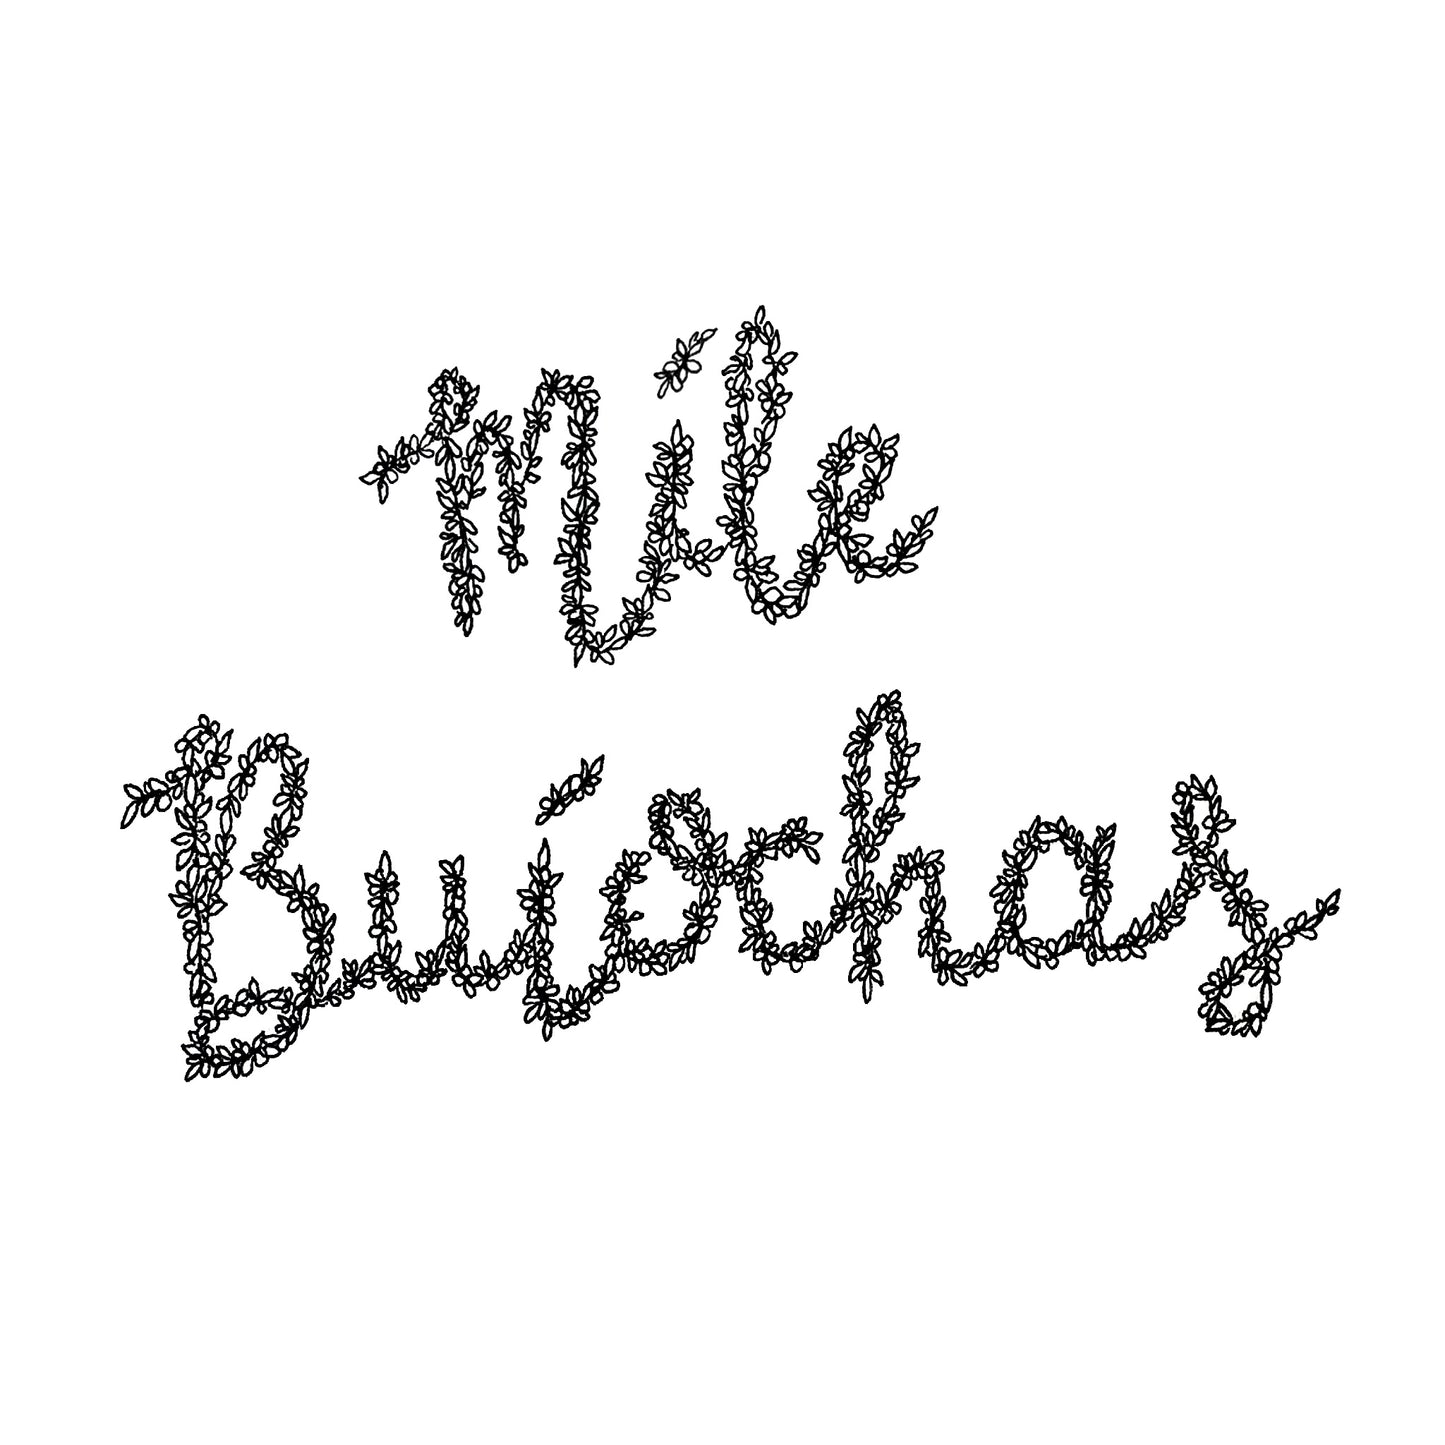 Image shows illustration of the Irish saying Míle Buíochas meaning Thanks A Million. illustration is drawn from petals flowers and a variety of plants. Image is entirely black. Image is set on a plain white background to shown how it looks when purhcased. 